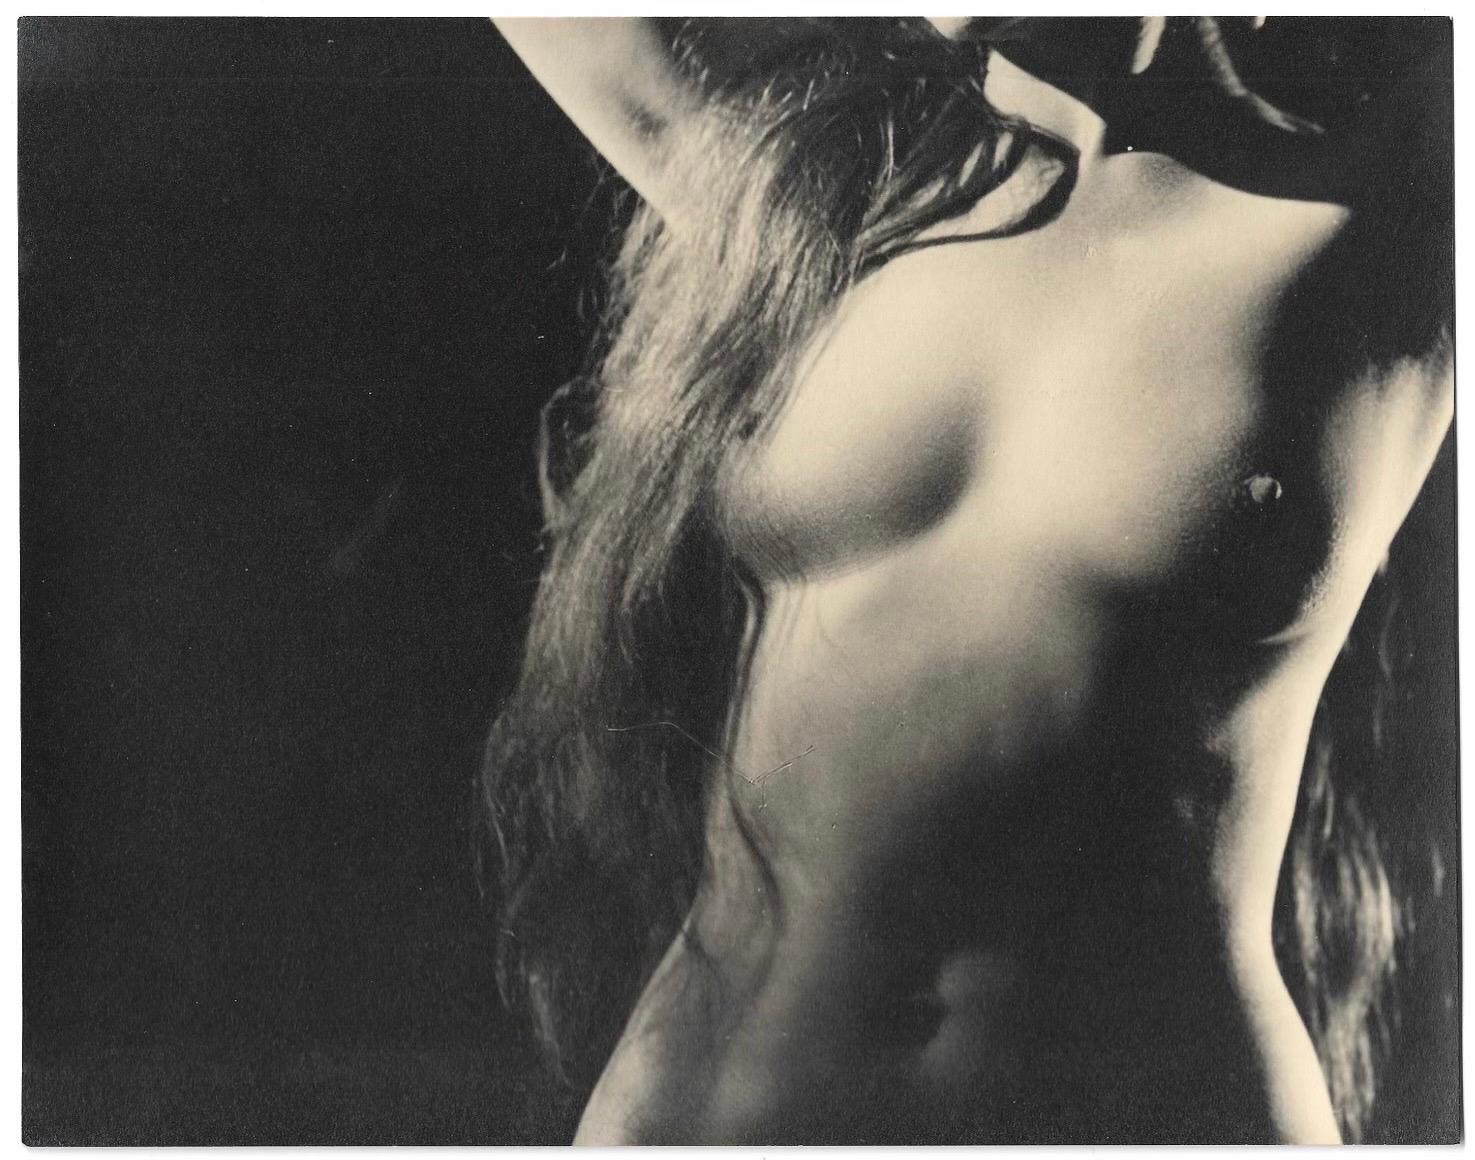 Black & White Photograph of a Female Nude by Contemporary American Photographer, Dan O'Neill. Dan is based in Brooklyn, New York. 

Photo Size 9.5 x 7.5 inches 
Unmounted & Unframed 

Dan has has work featured in the following magazines: 
BAZAAR •